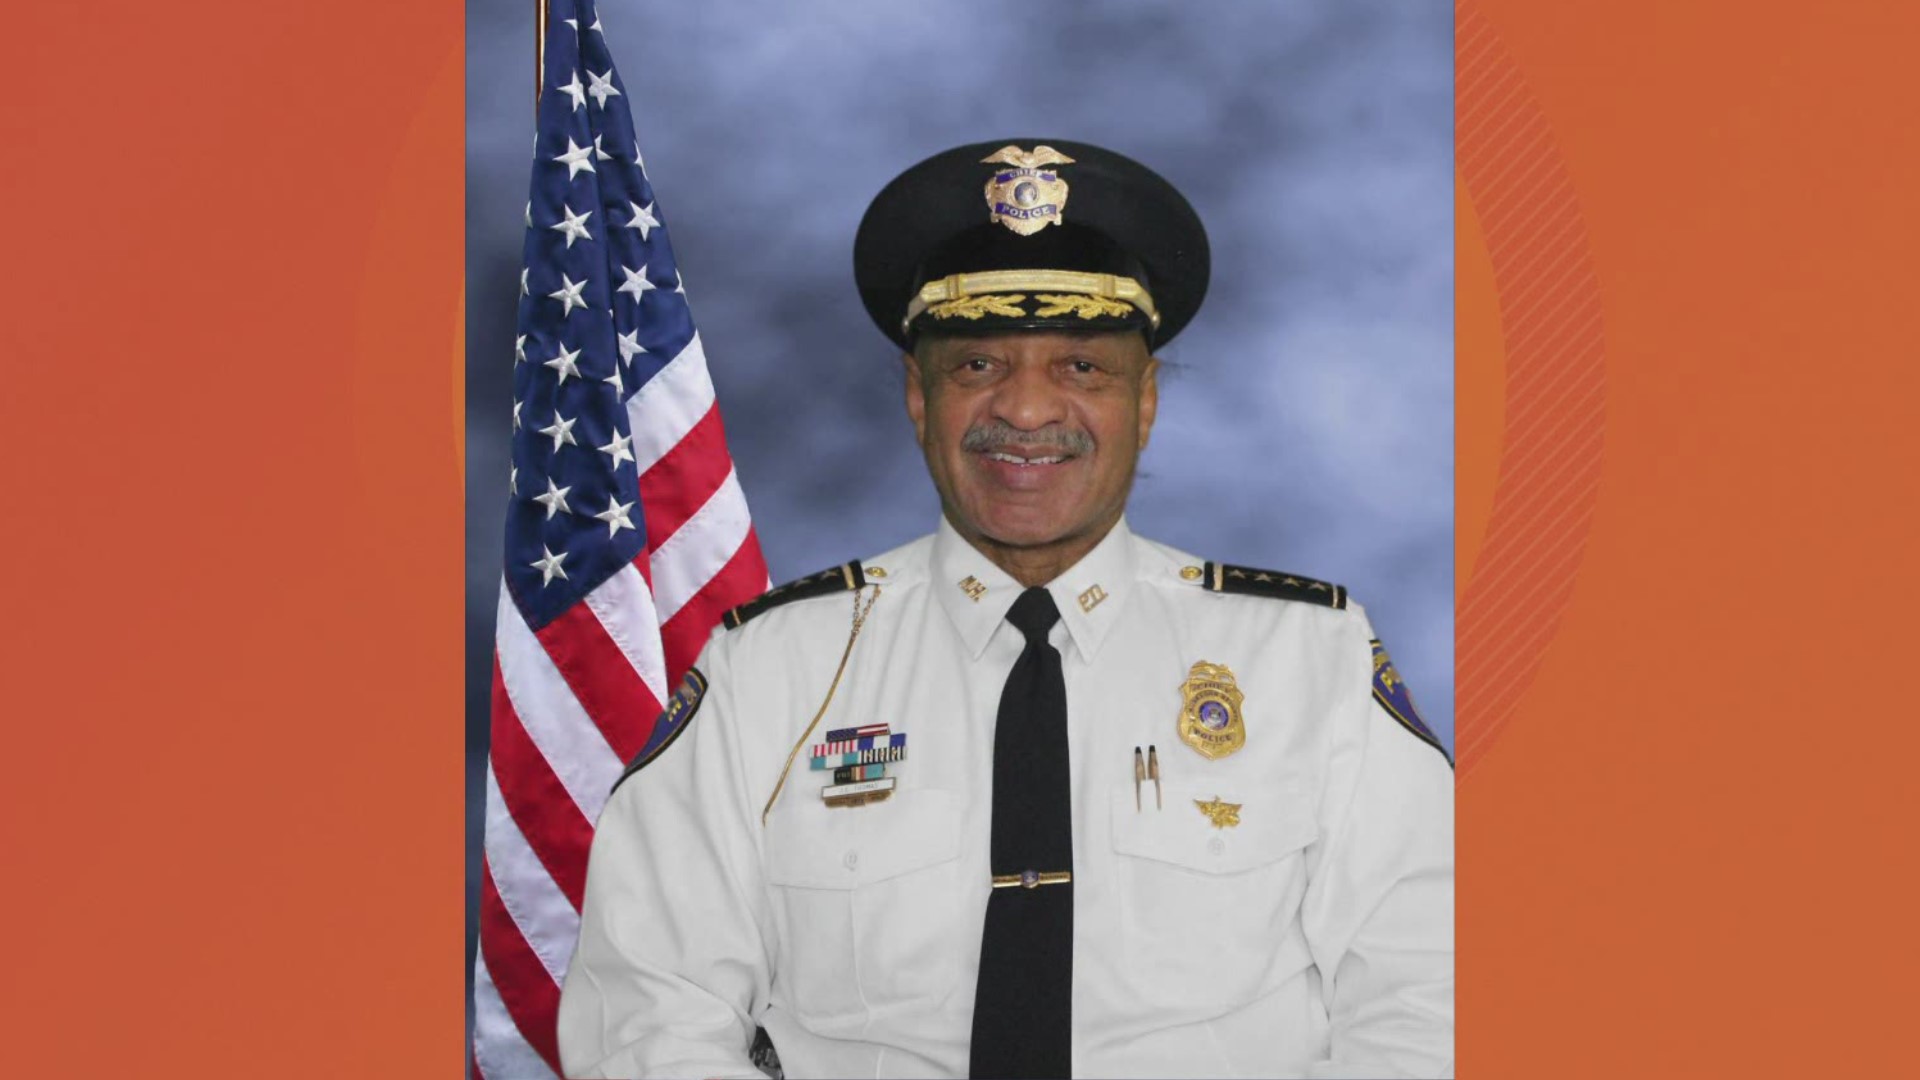 Muskegon Heights police chief offered public safety director job in Ecorse, Mich.